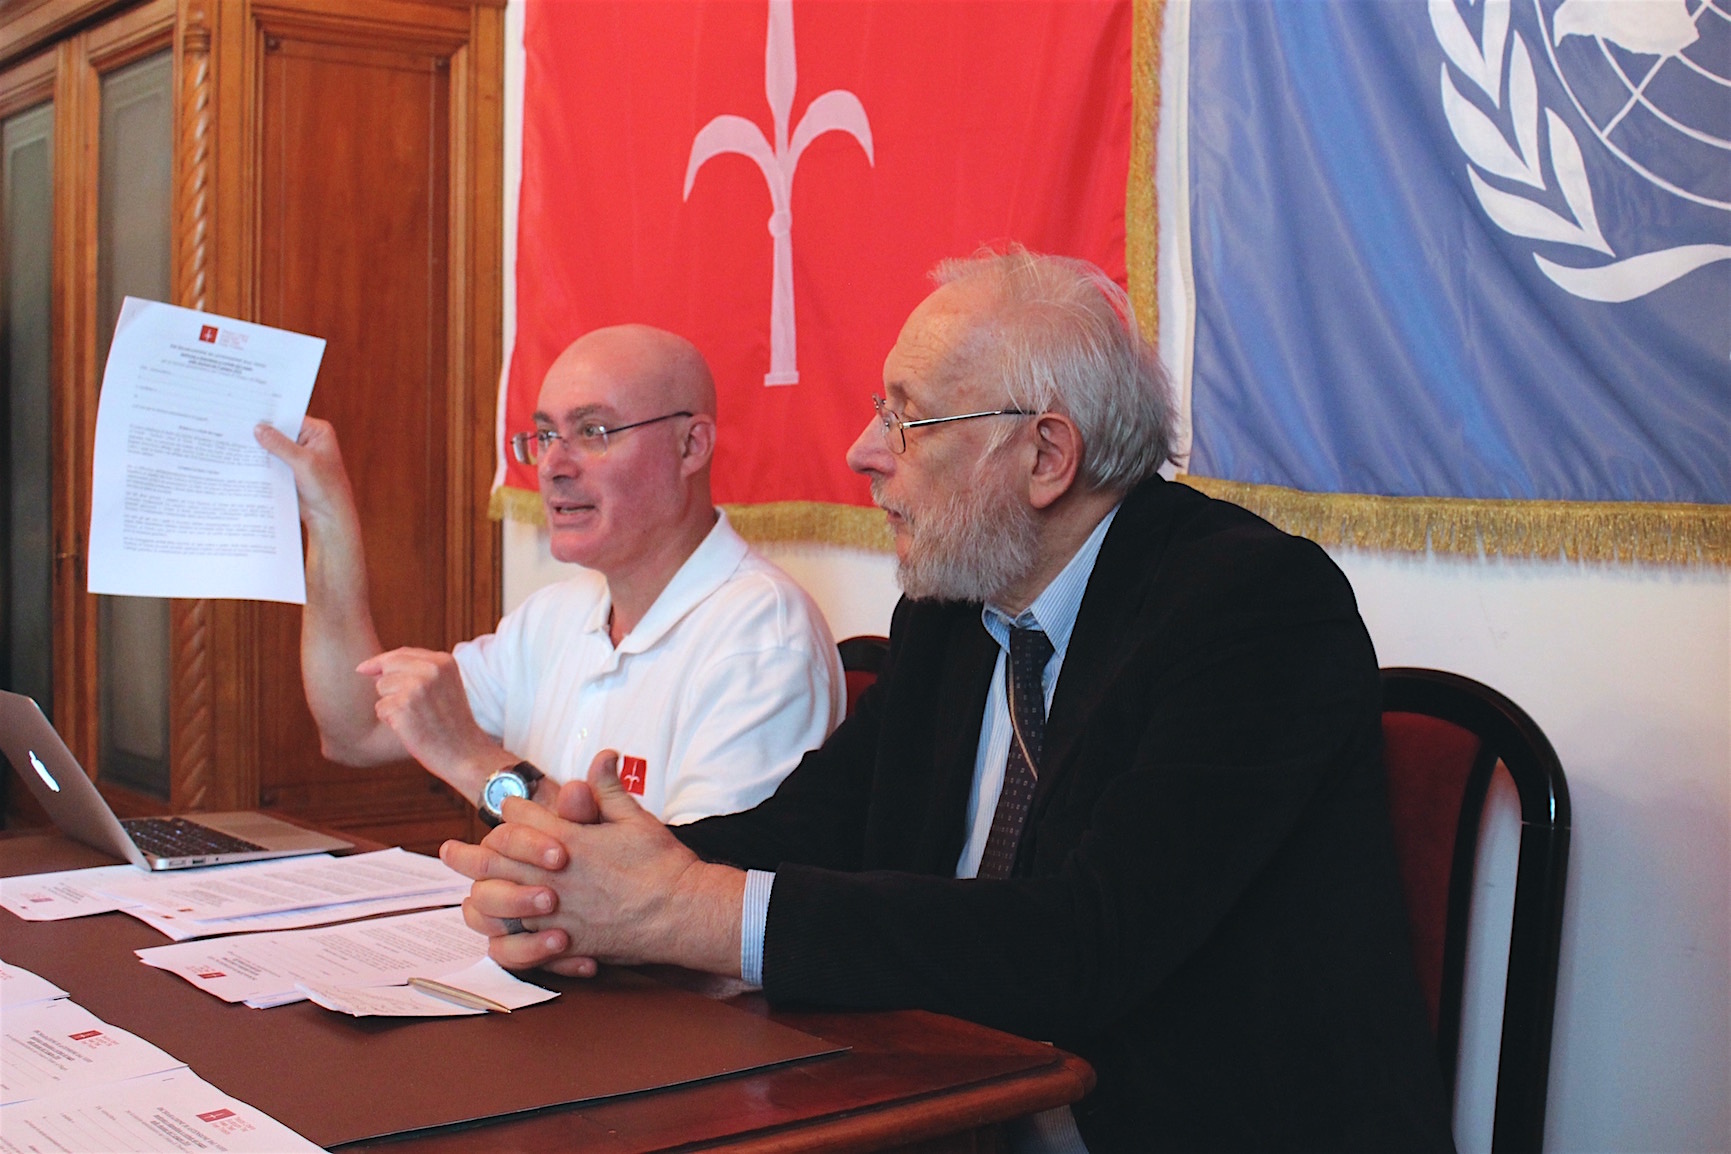 Free Trieste gets ready to have the 5 June municipal elections invalidated